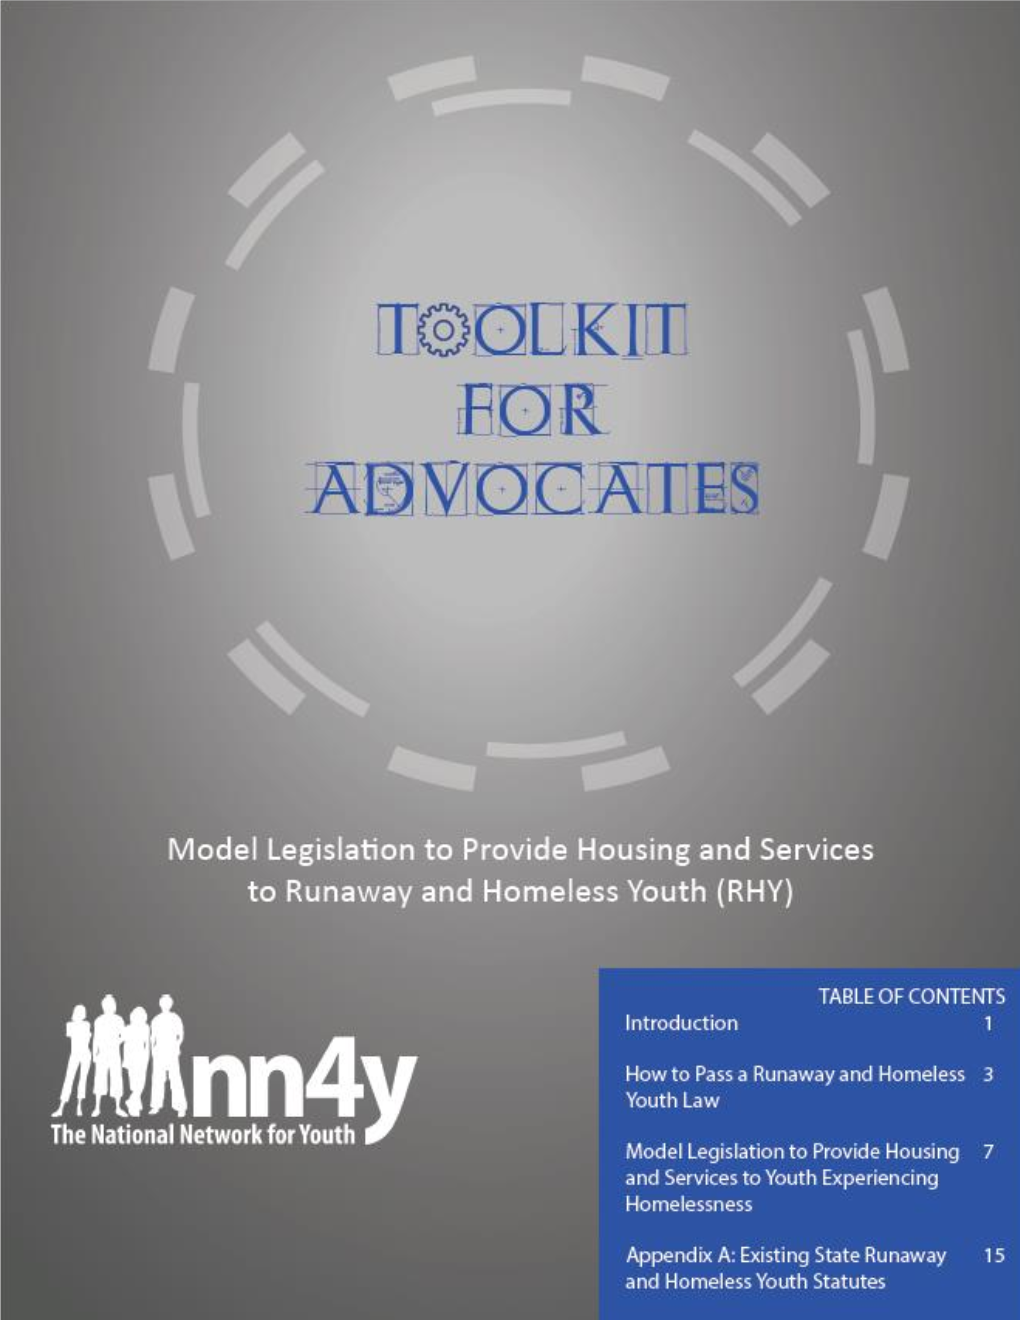 Model Legislation to Provide Housing and Services to Runaway And